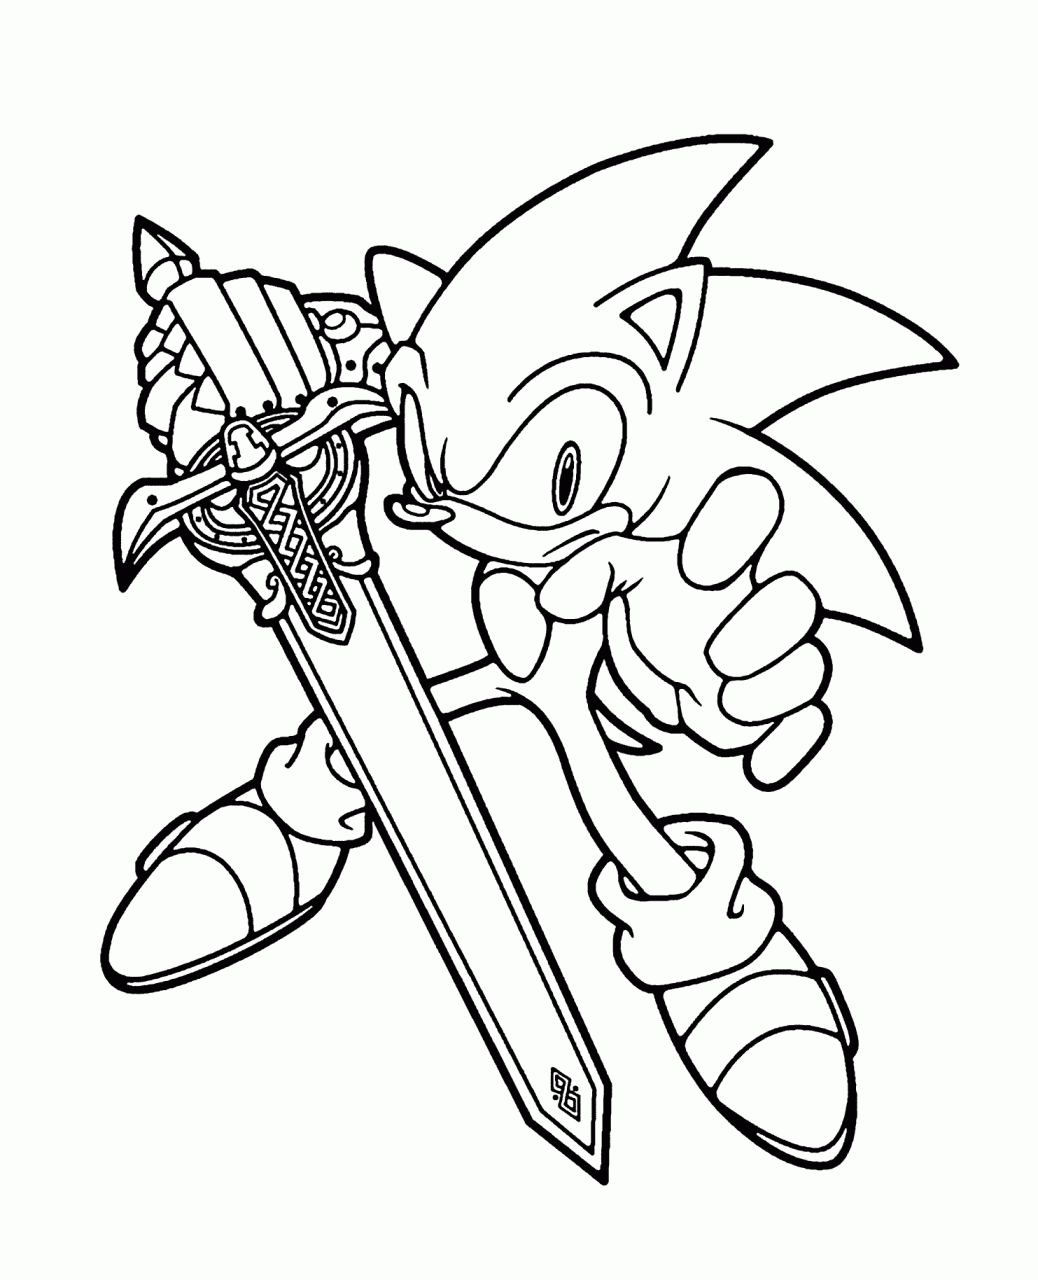 Free Coloring Pictures Of Sonic The Hedgehog